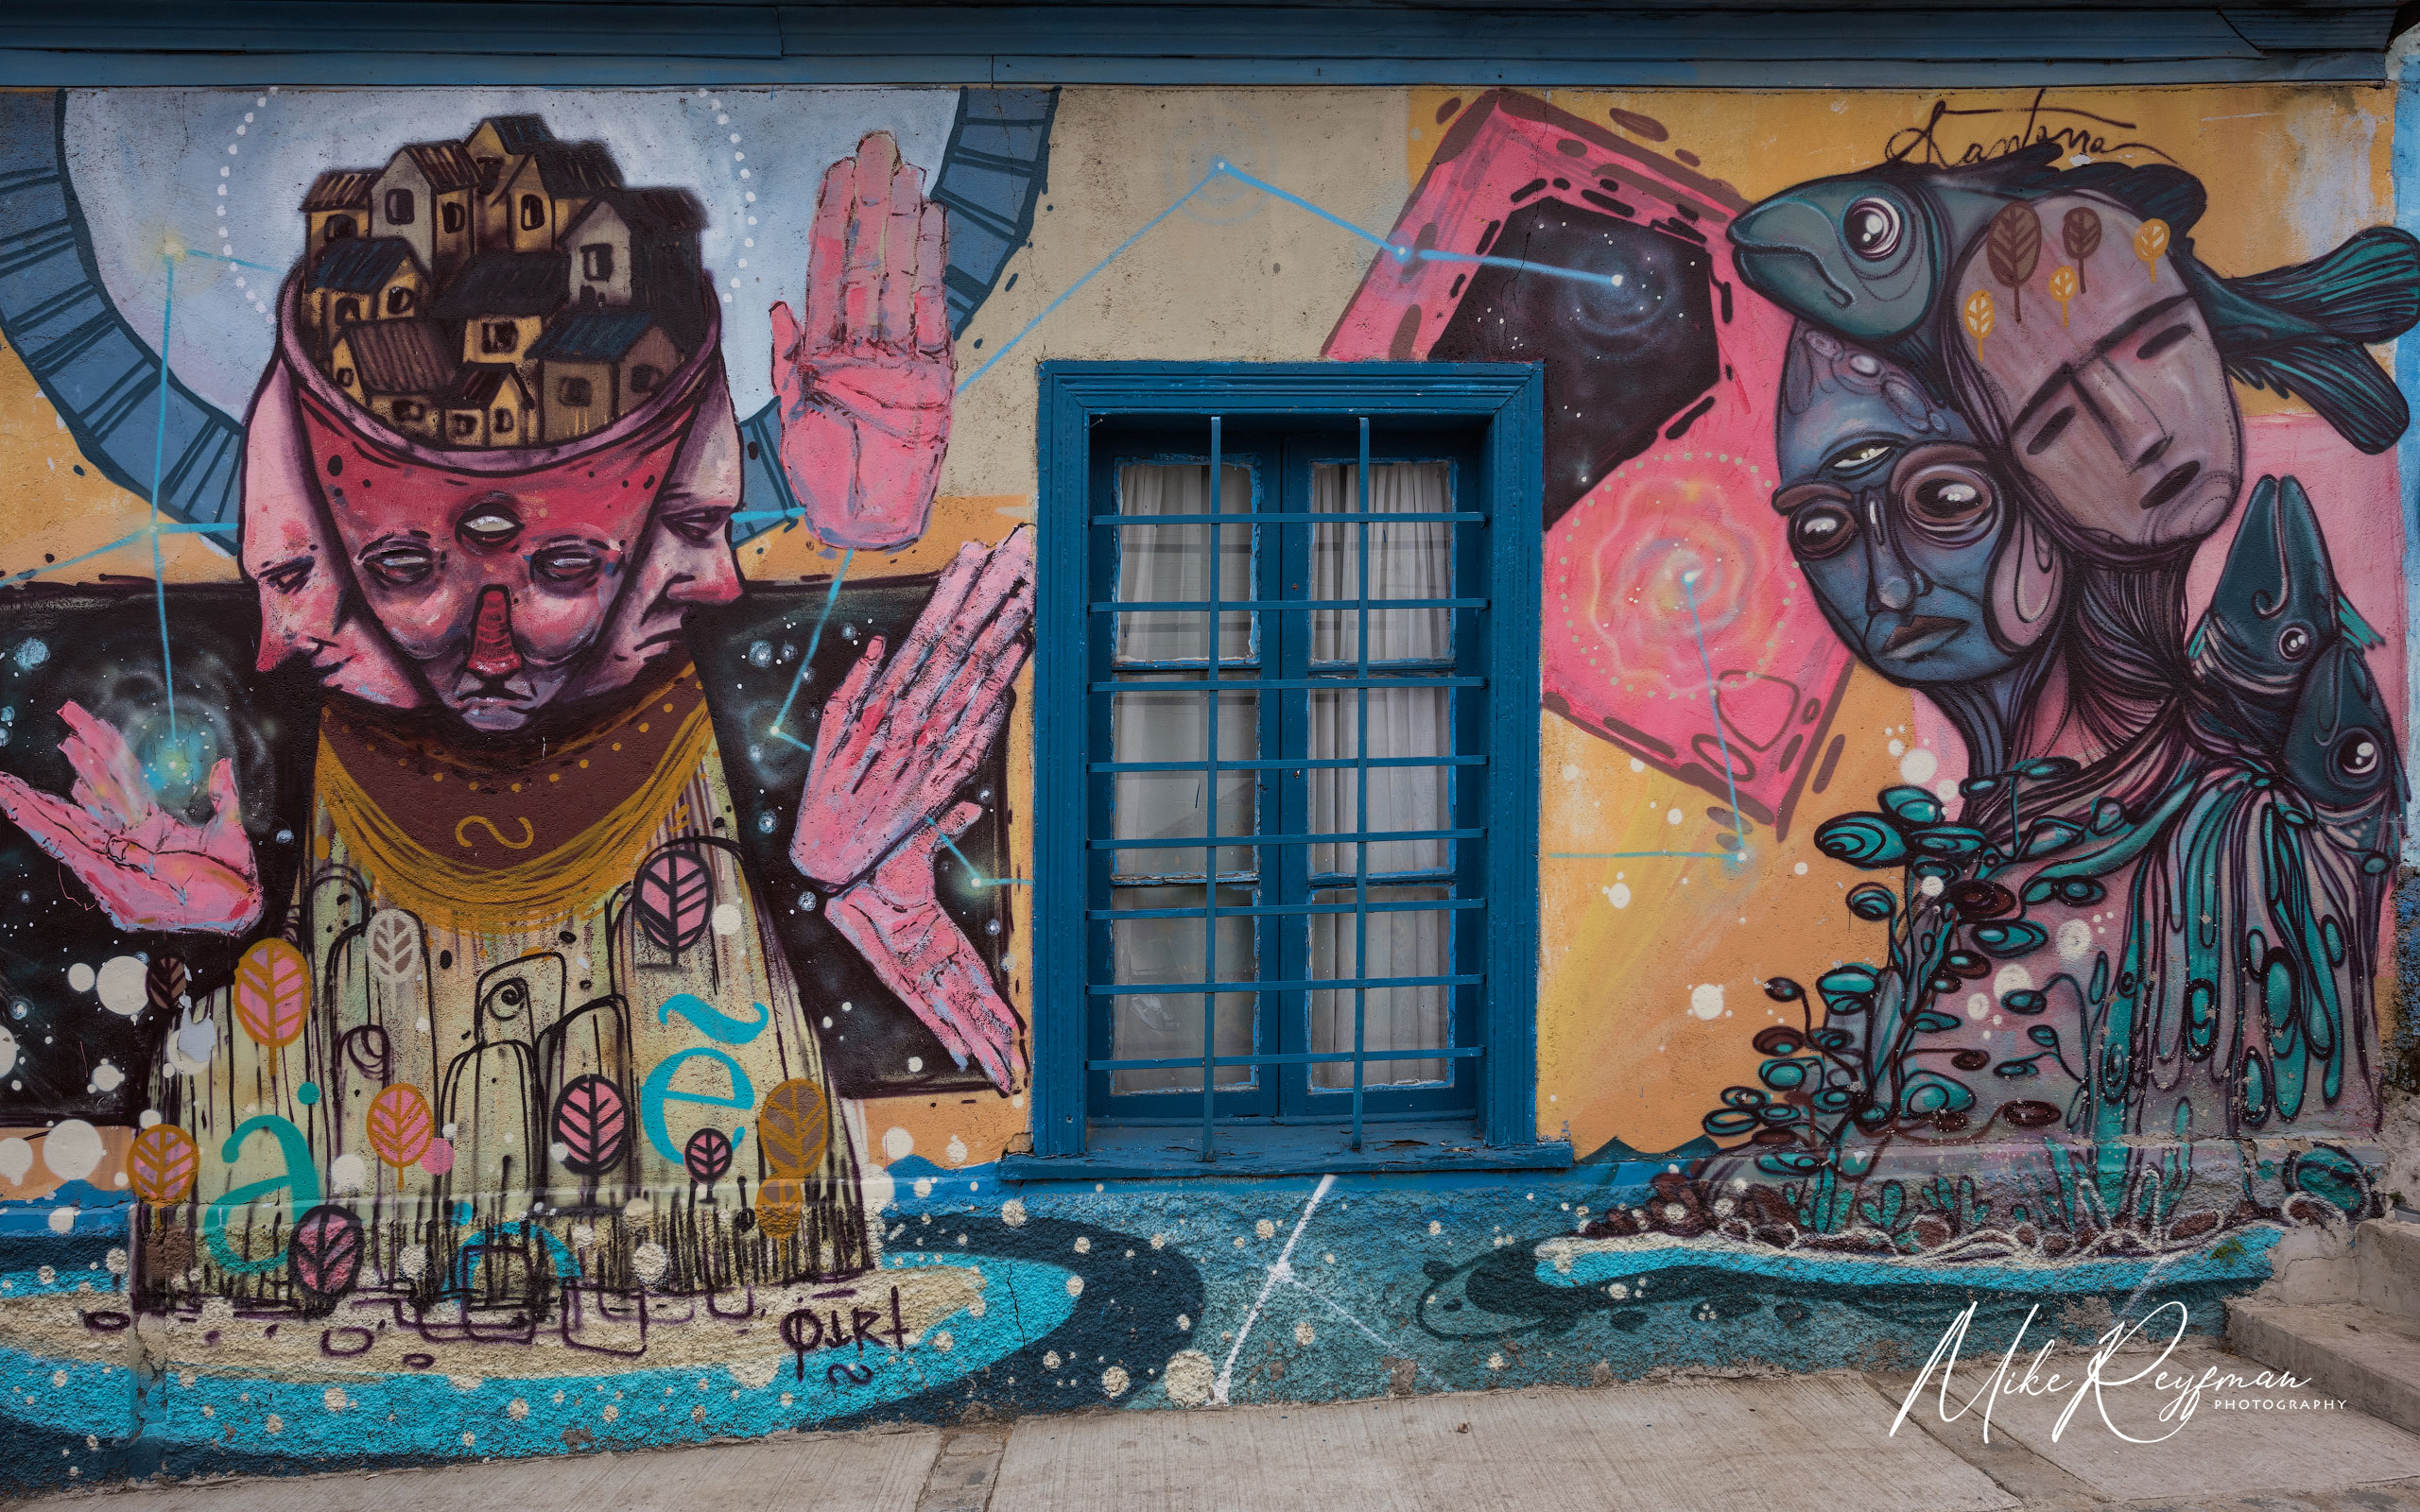 Valparaiso, Chile. The Graffiti Capital of the World 005-VP _D1D0239 - Valparaiso, Chile. The Graffiti Capital of the World - Mike Reyfman Photography